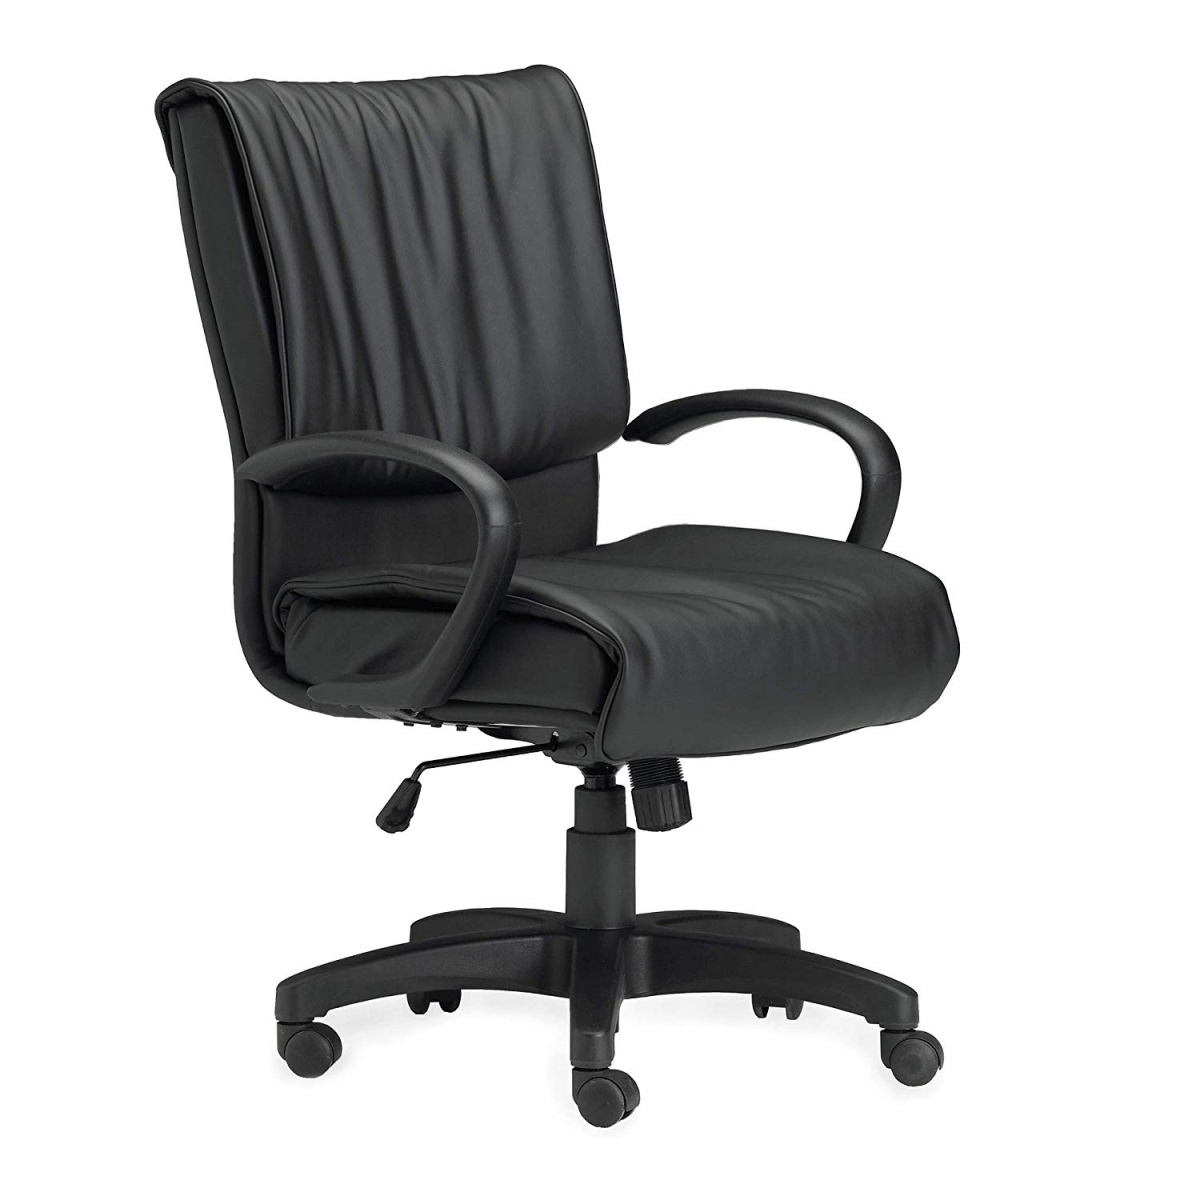 2547may Mercado Leather Chair - Black